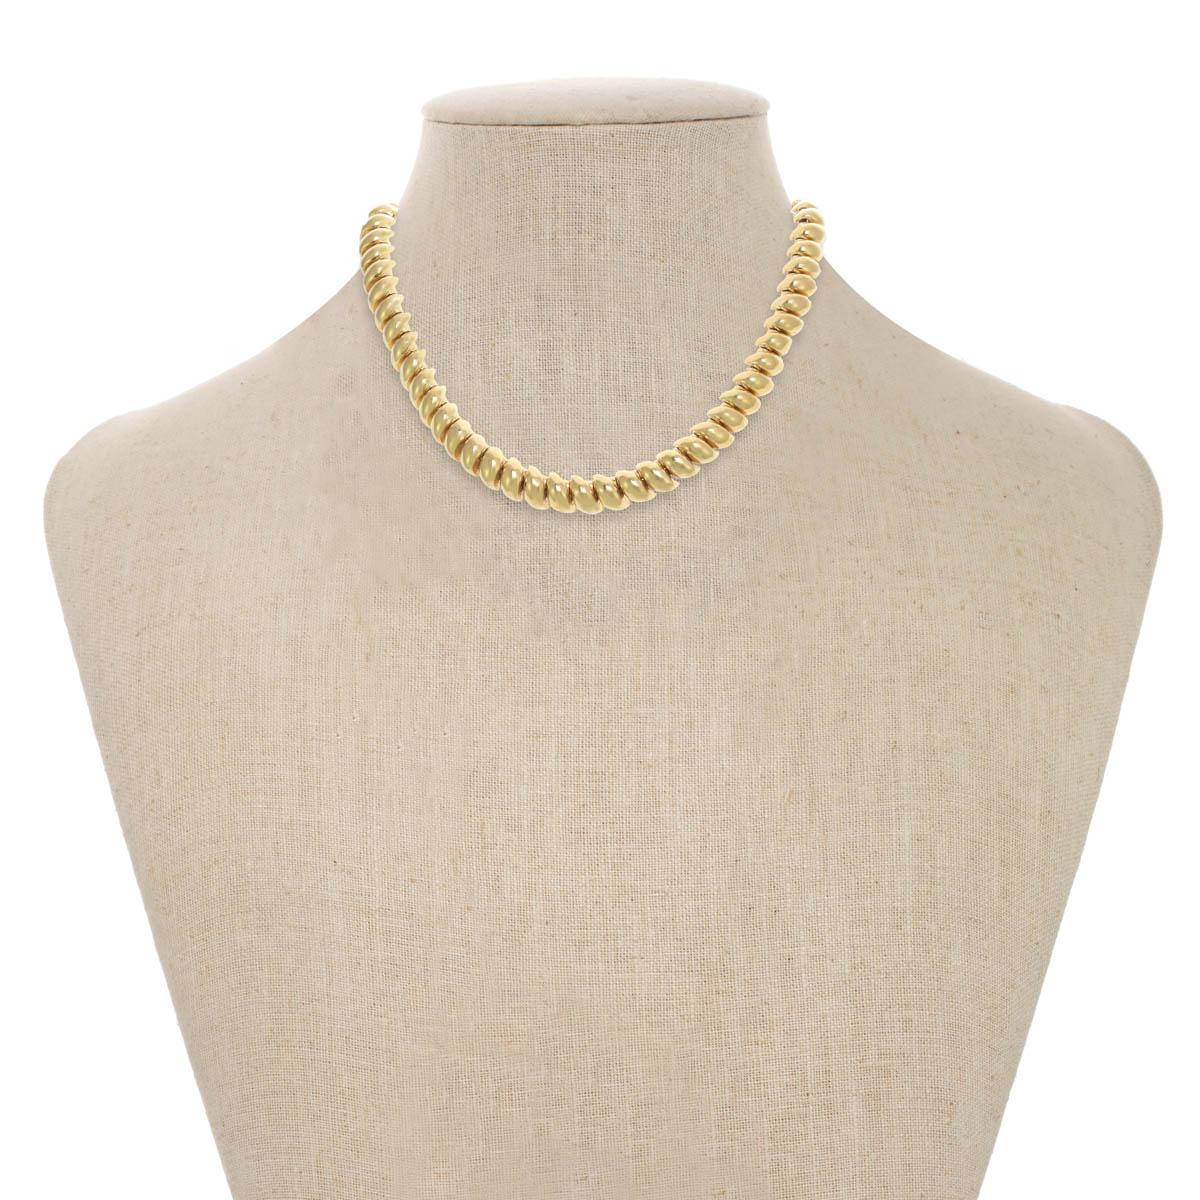 Bold and beautiful! This timelessly chic necklace has petite gold pellets that offer the perfect amount of sophistication. This is the perfect necklace to transition from work to play!

Please message us if you would like to order this in rhodium